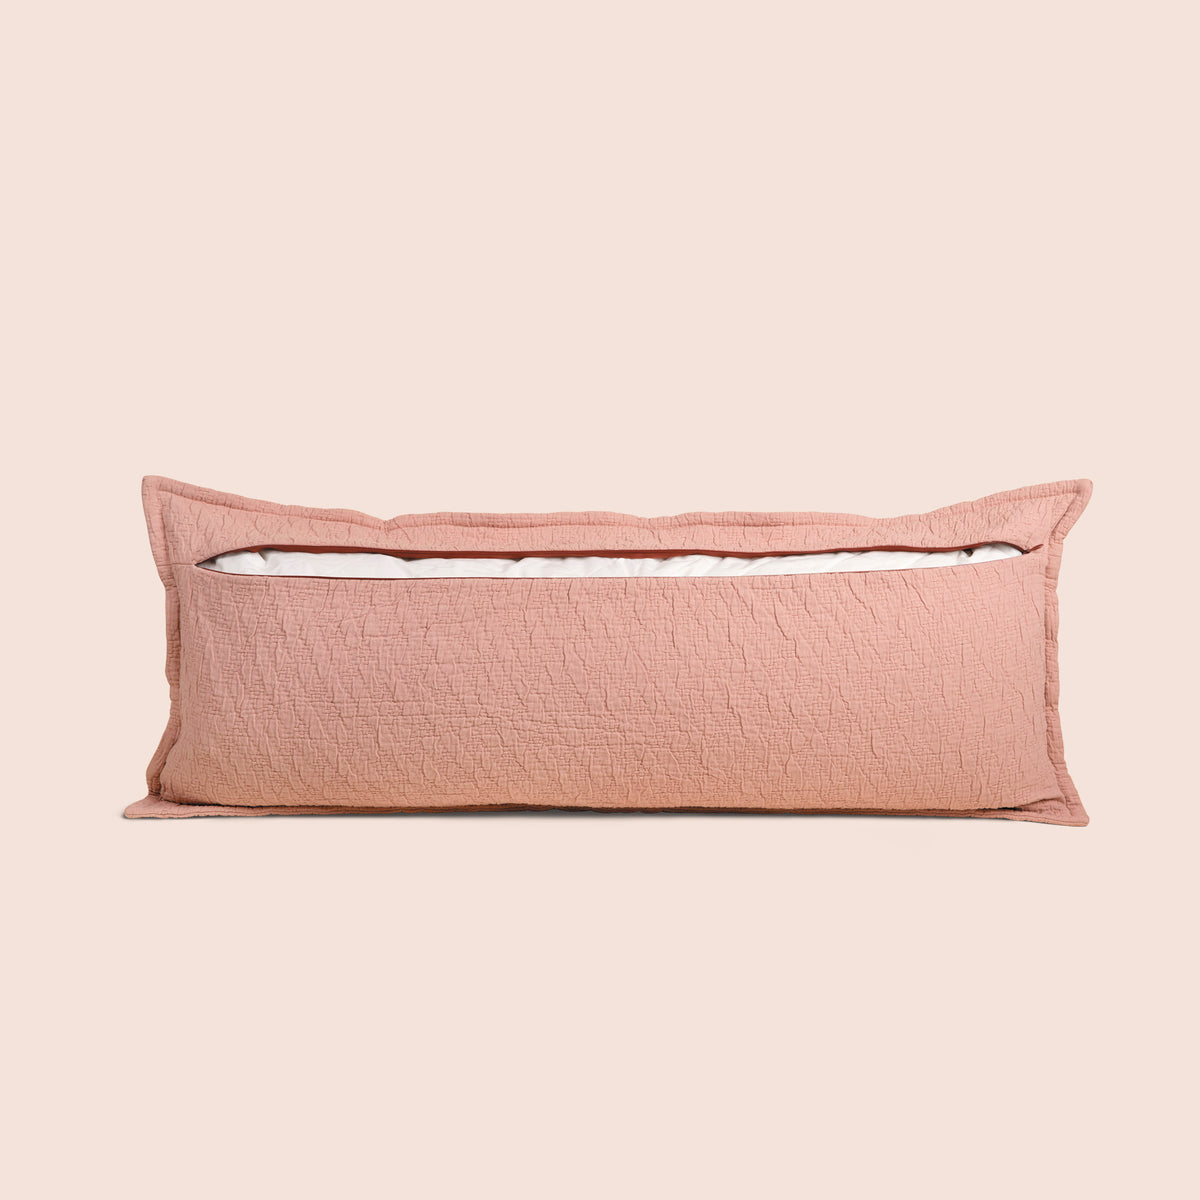 Image of the back of the Pink Sandstone Wave Lumbar Pillow Cover on a lumbar pillow with the back zipper open on a light pink background